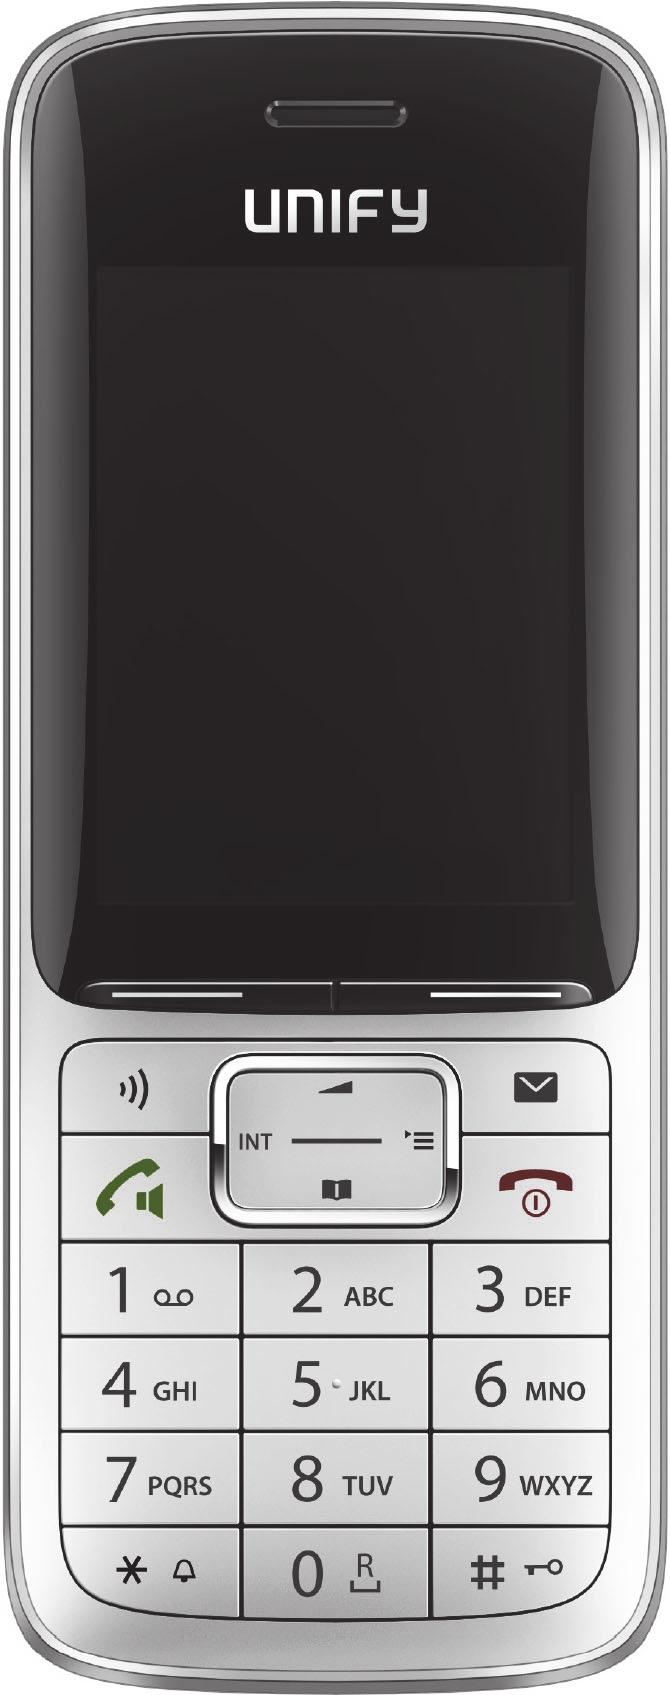 6 Overview Overview Base 1 1 2 1 Display 2 Status bar ( S. 40) Icons display current settings and operating status of the phone 3 Display keys ( S. 12) 4 Message key ( S.